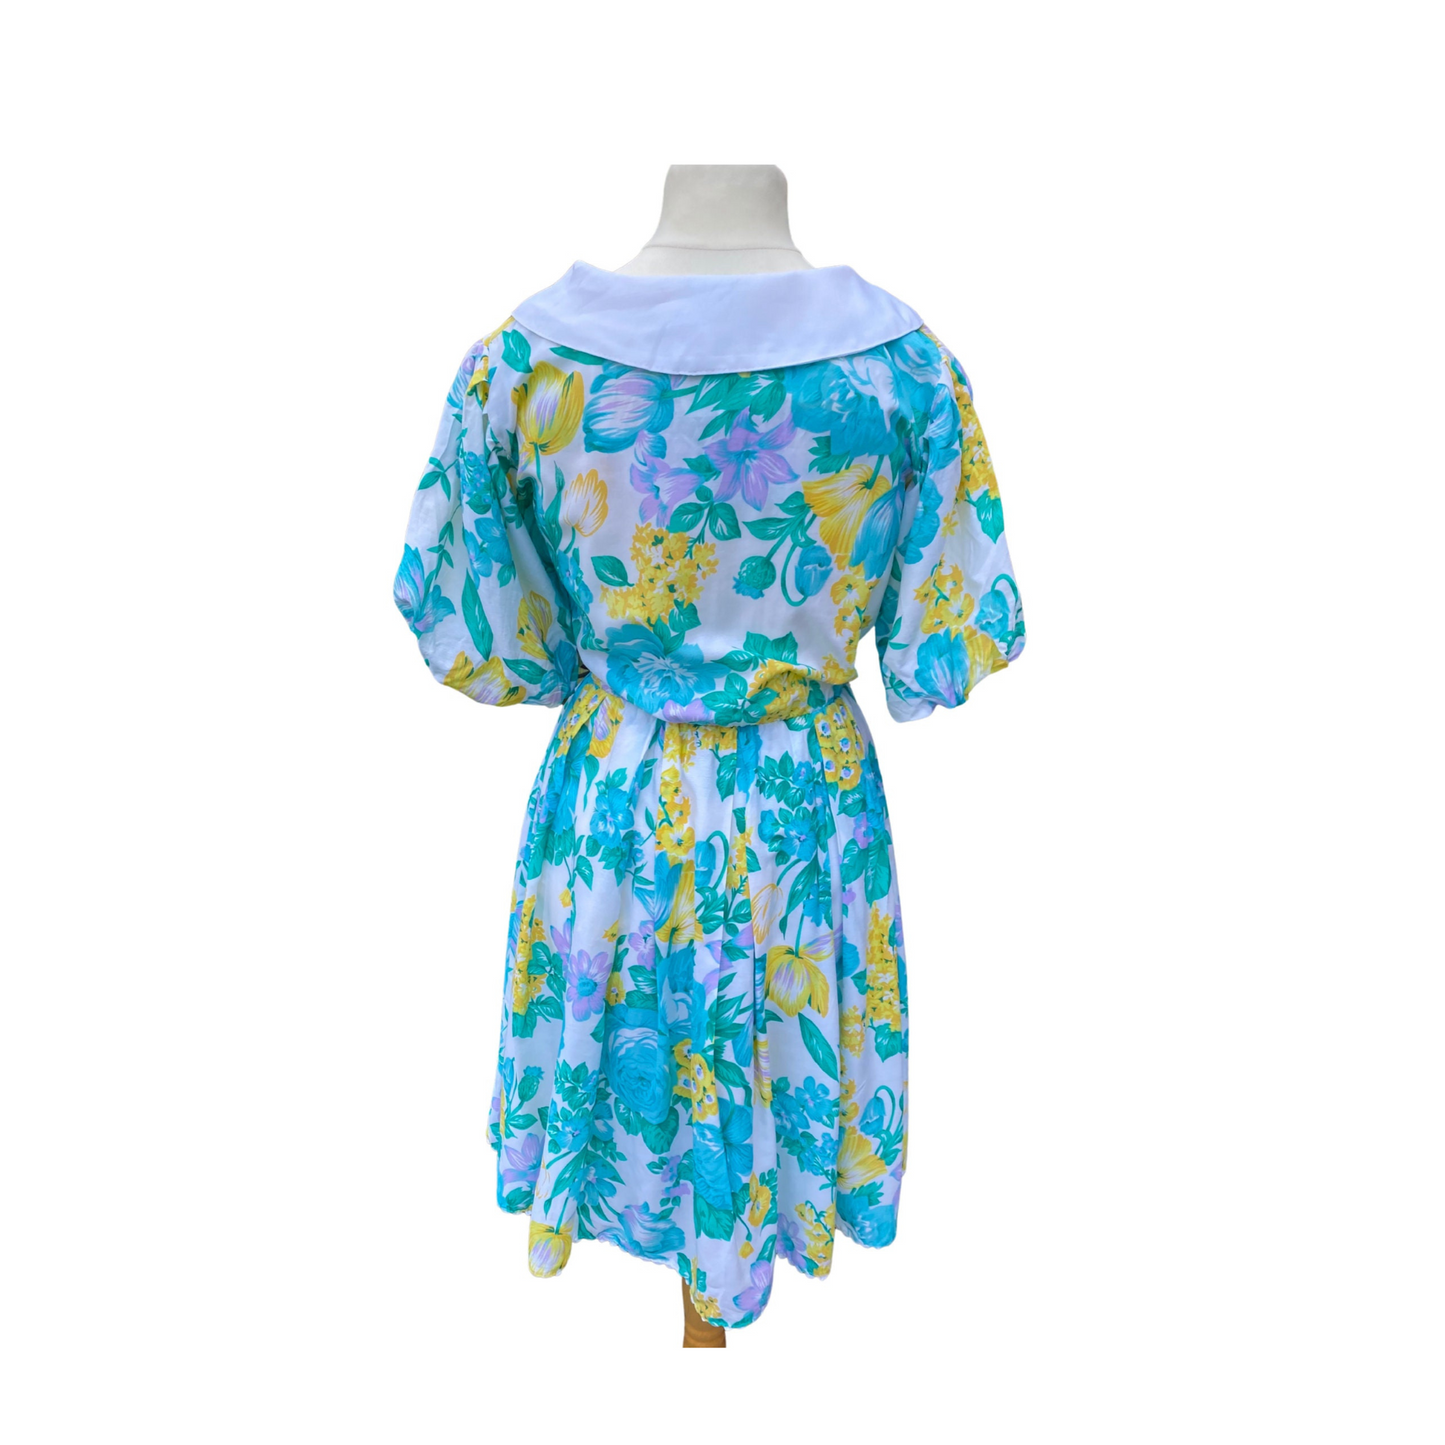 80s white, yellow and green cotton floral dress with puffed sleeves. Approx UK size 10-12